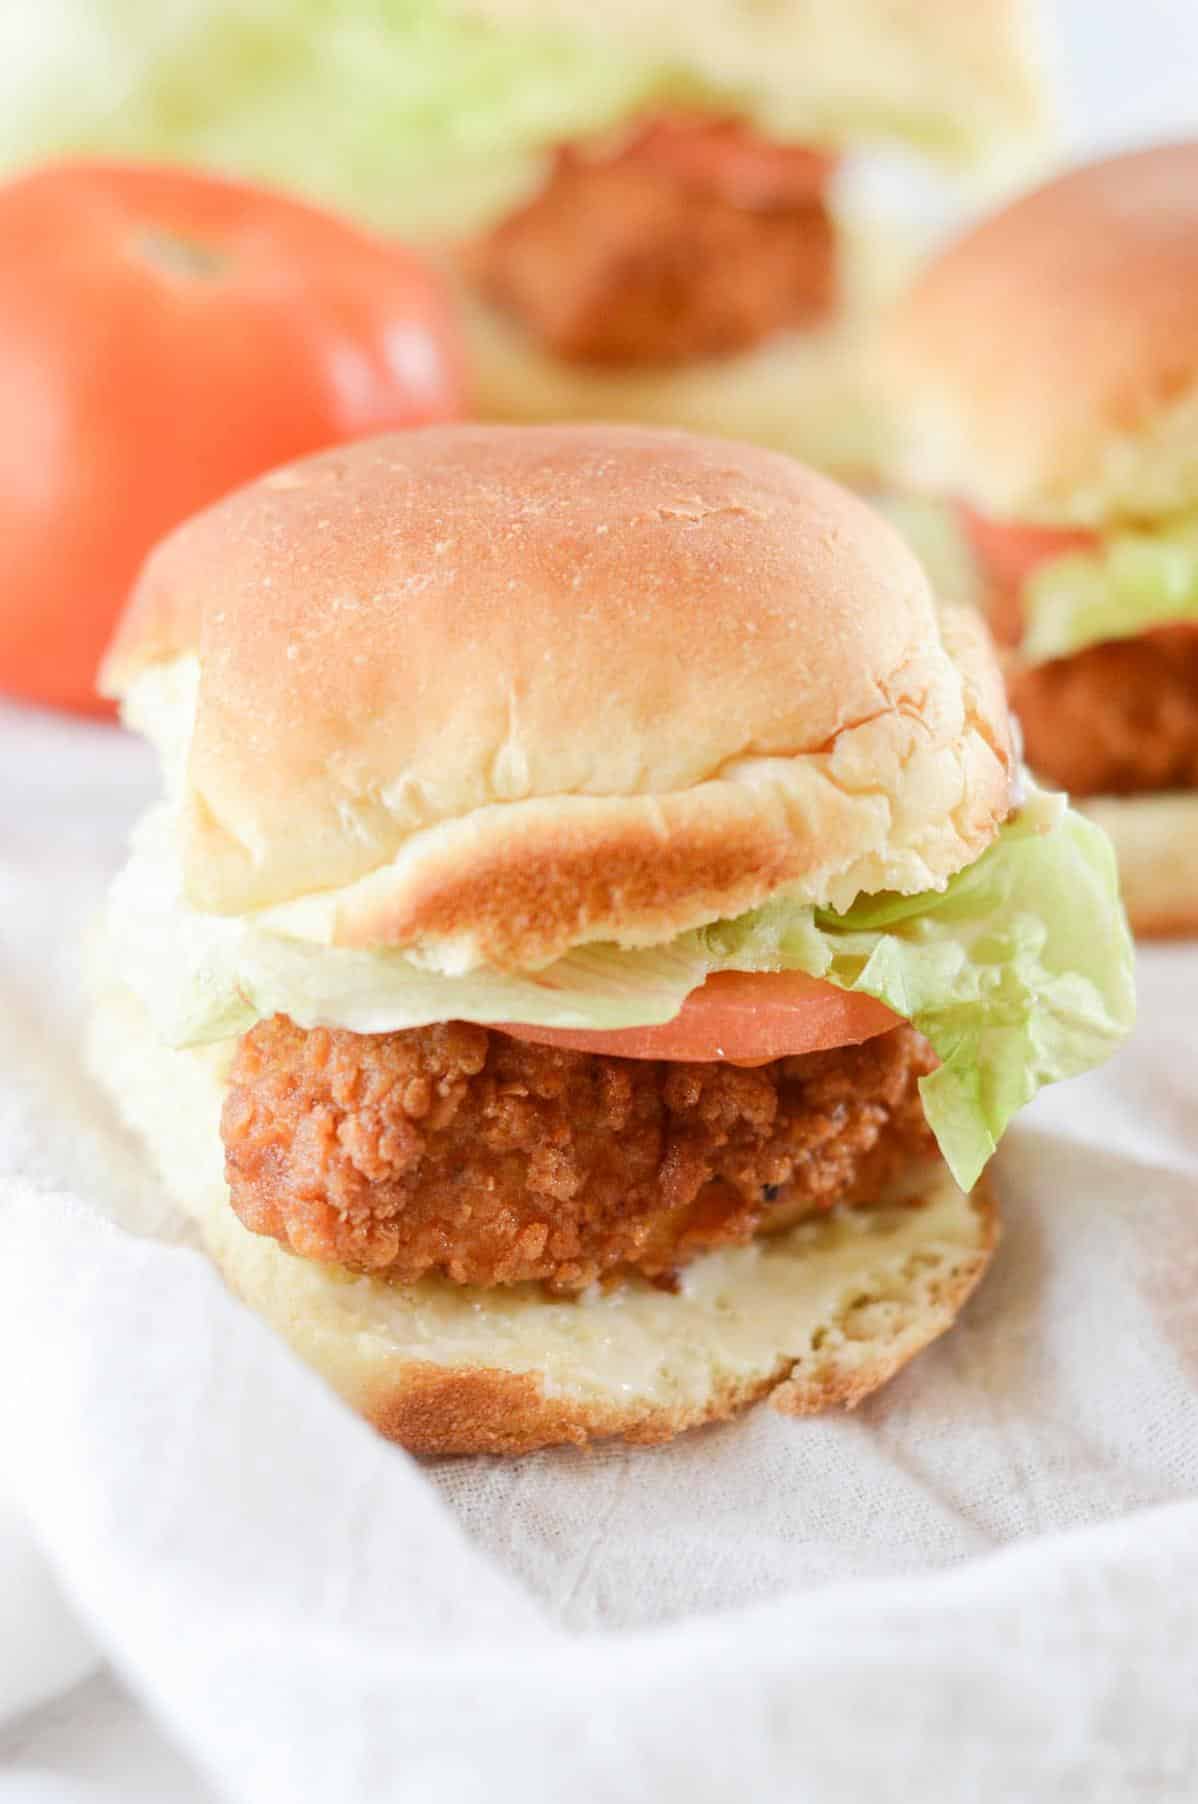  The irresistible combo of crispy chicken and soft buns.